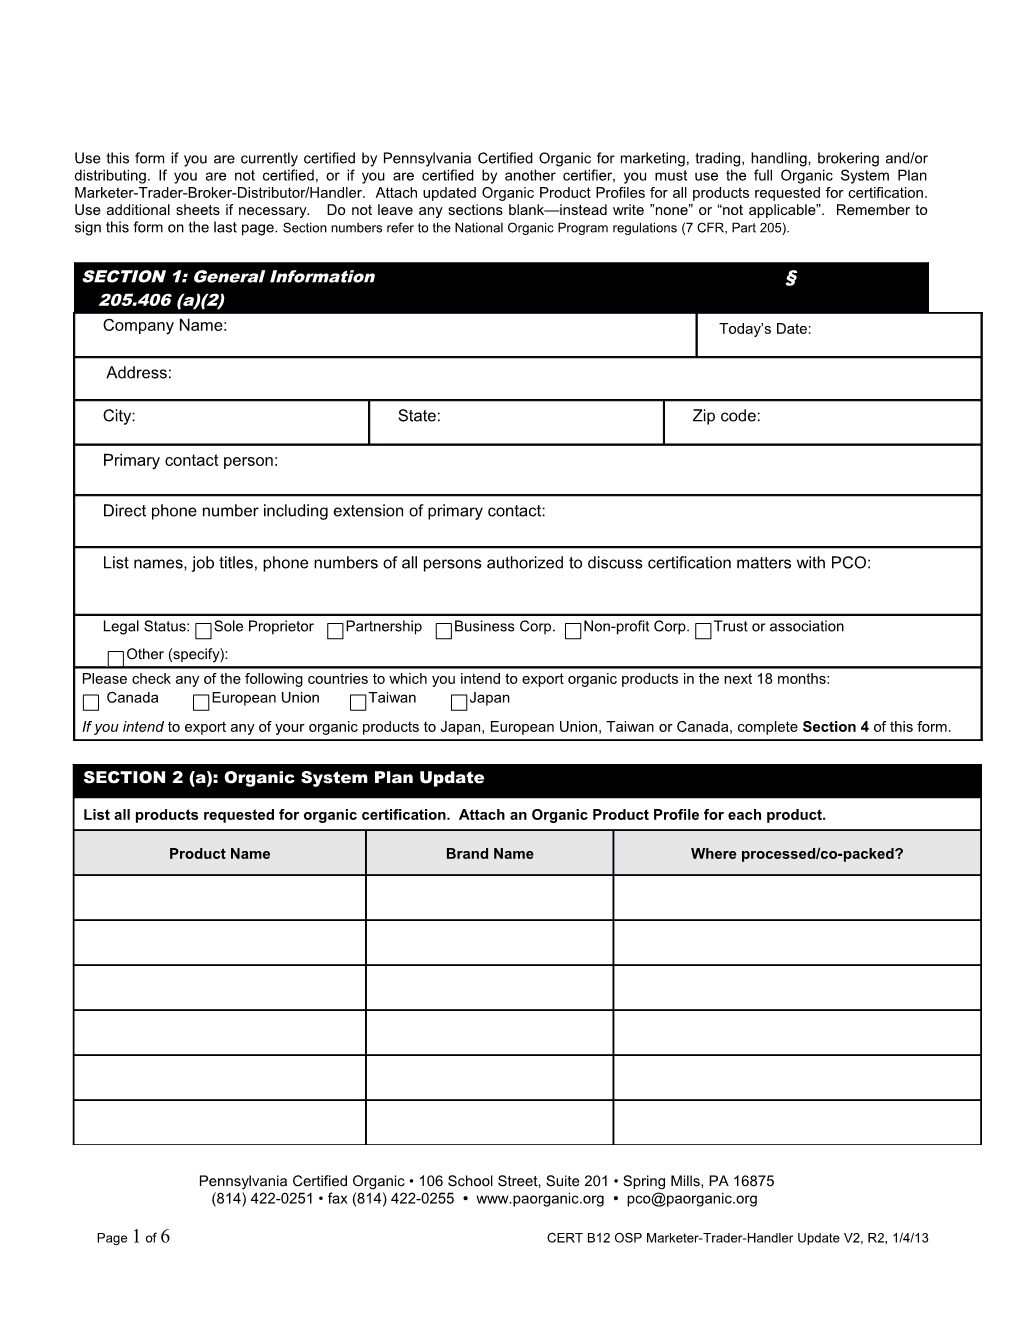 Use This Form If You Are Requesting Renewal of Organic Process/Handling Certification And